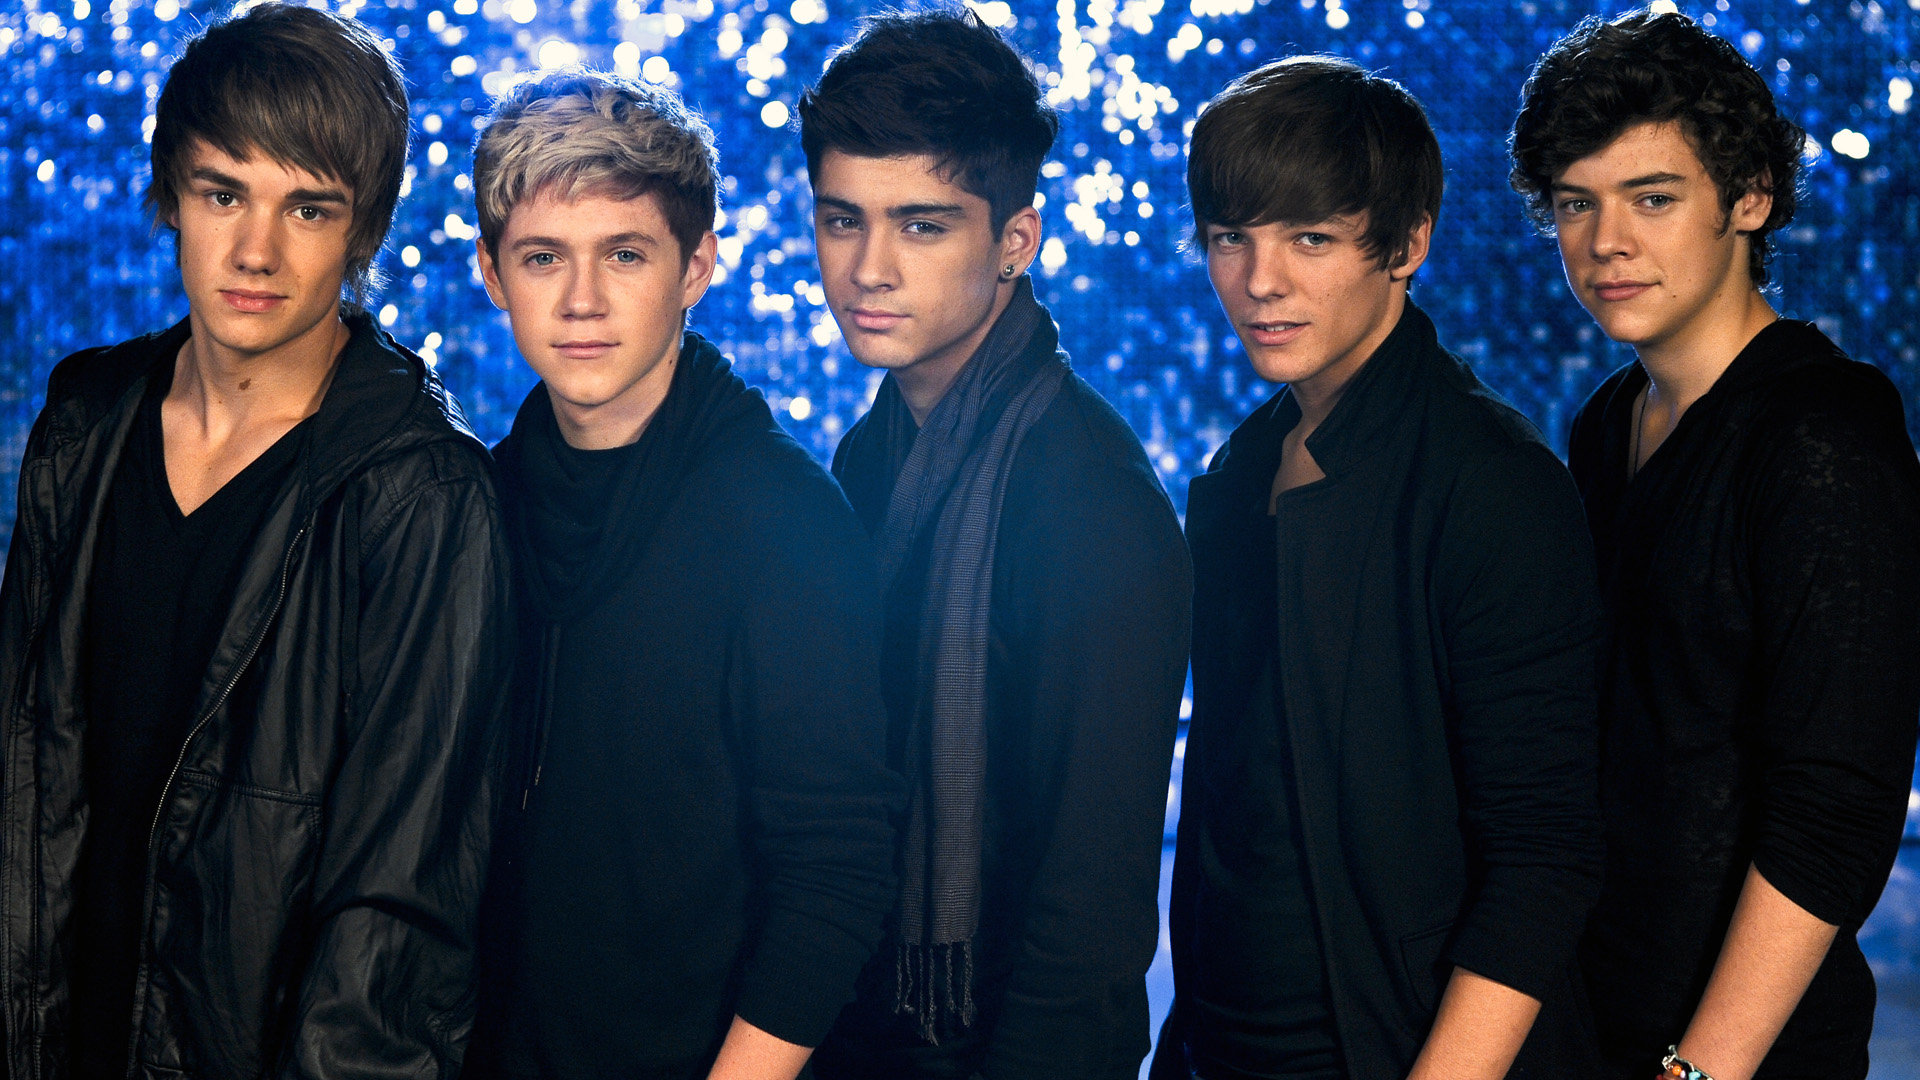 Download hd 1920x1080 One Direction PC background ID:299837 for free